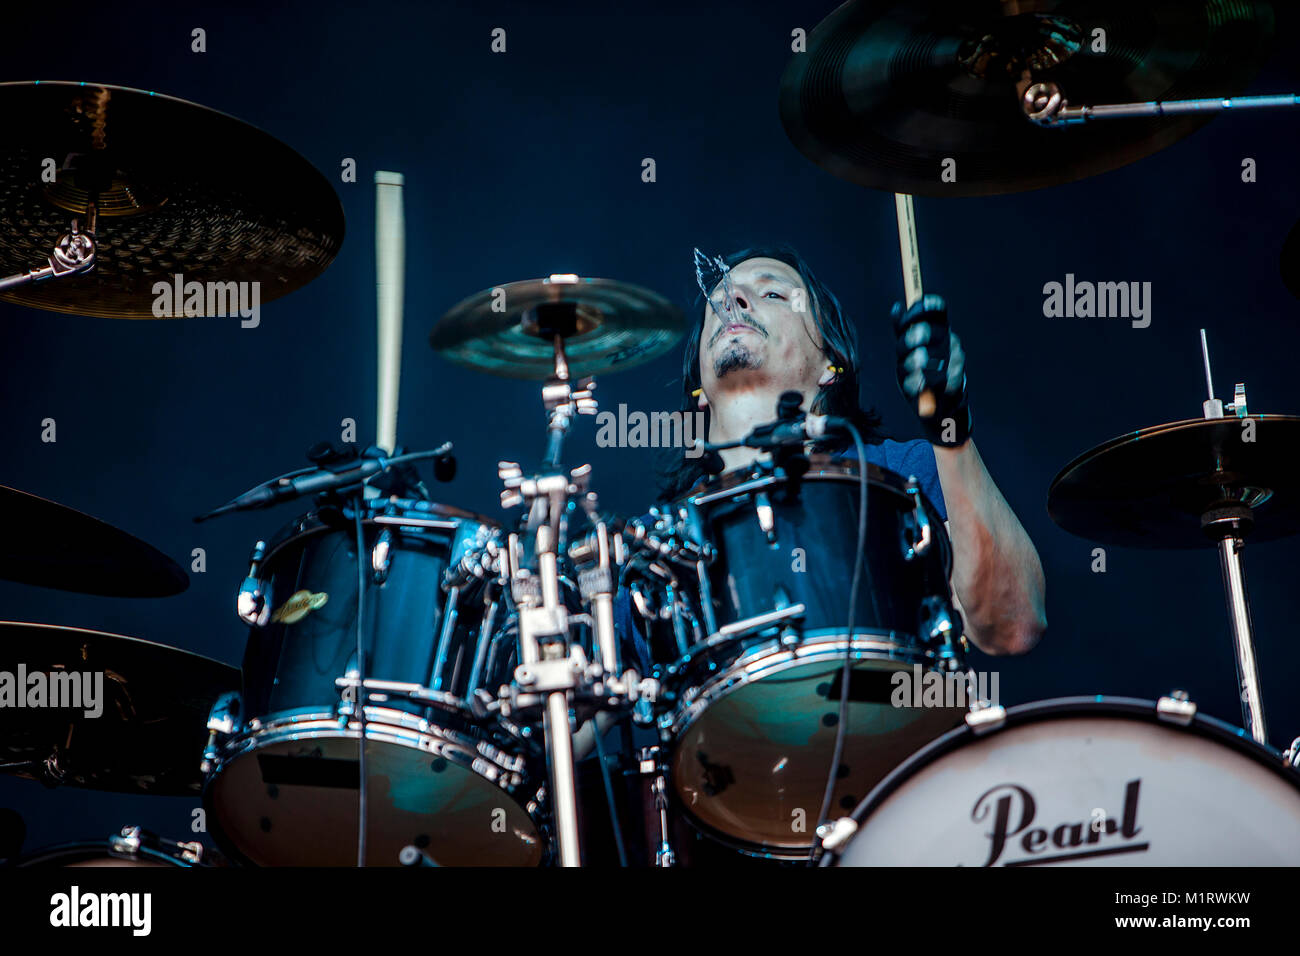 The French death metal band Gojira performs a live concert at Plenen in Bergen. Here drummer Mario Duplantier is seen live on stage. Norway, 13/06 2012. Stock Photo